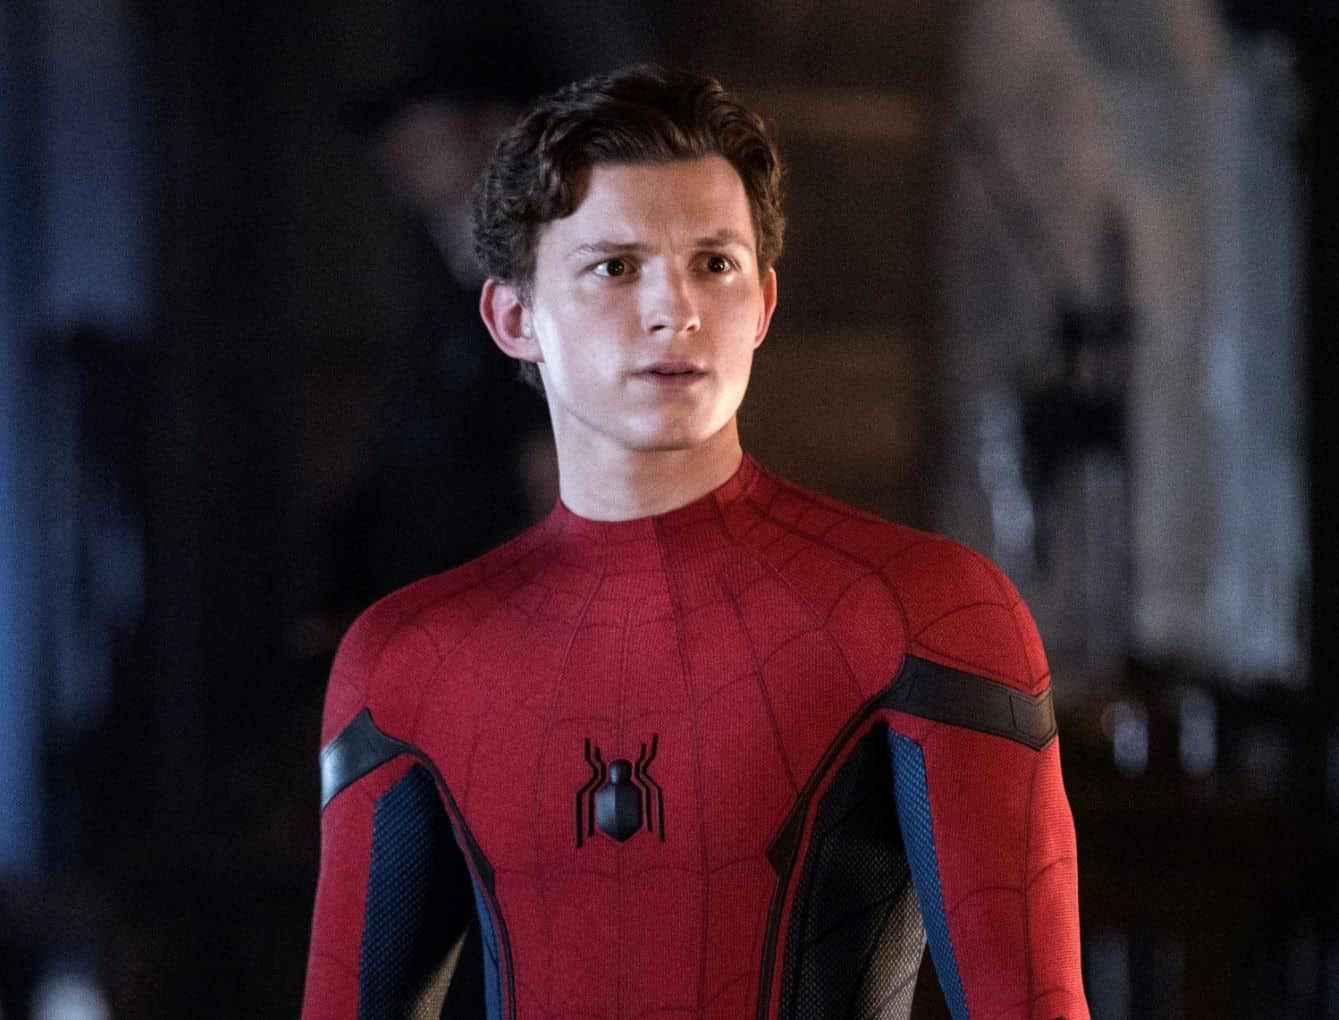 'No Way Home': New Spider-Man film title is finally revealed